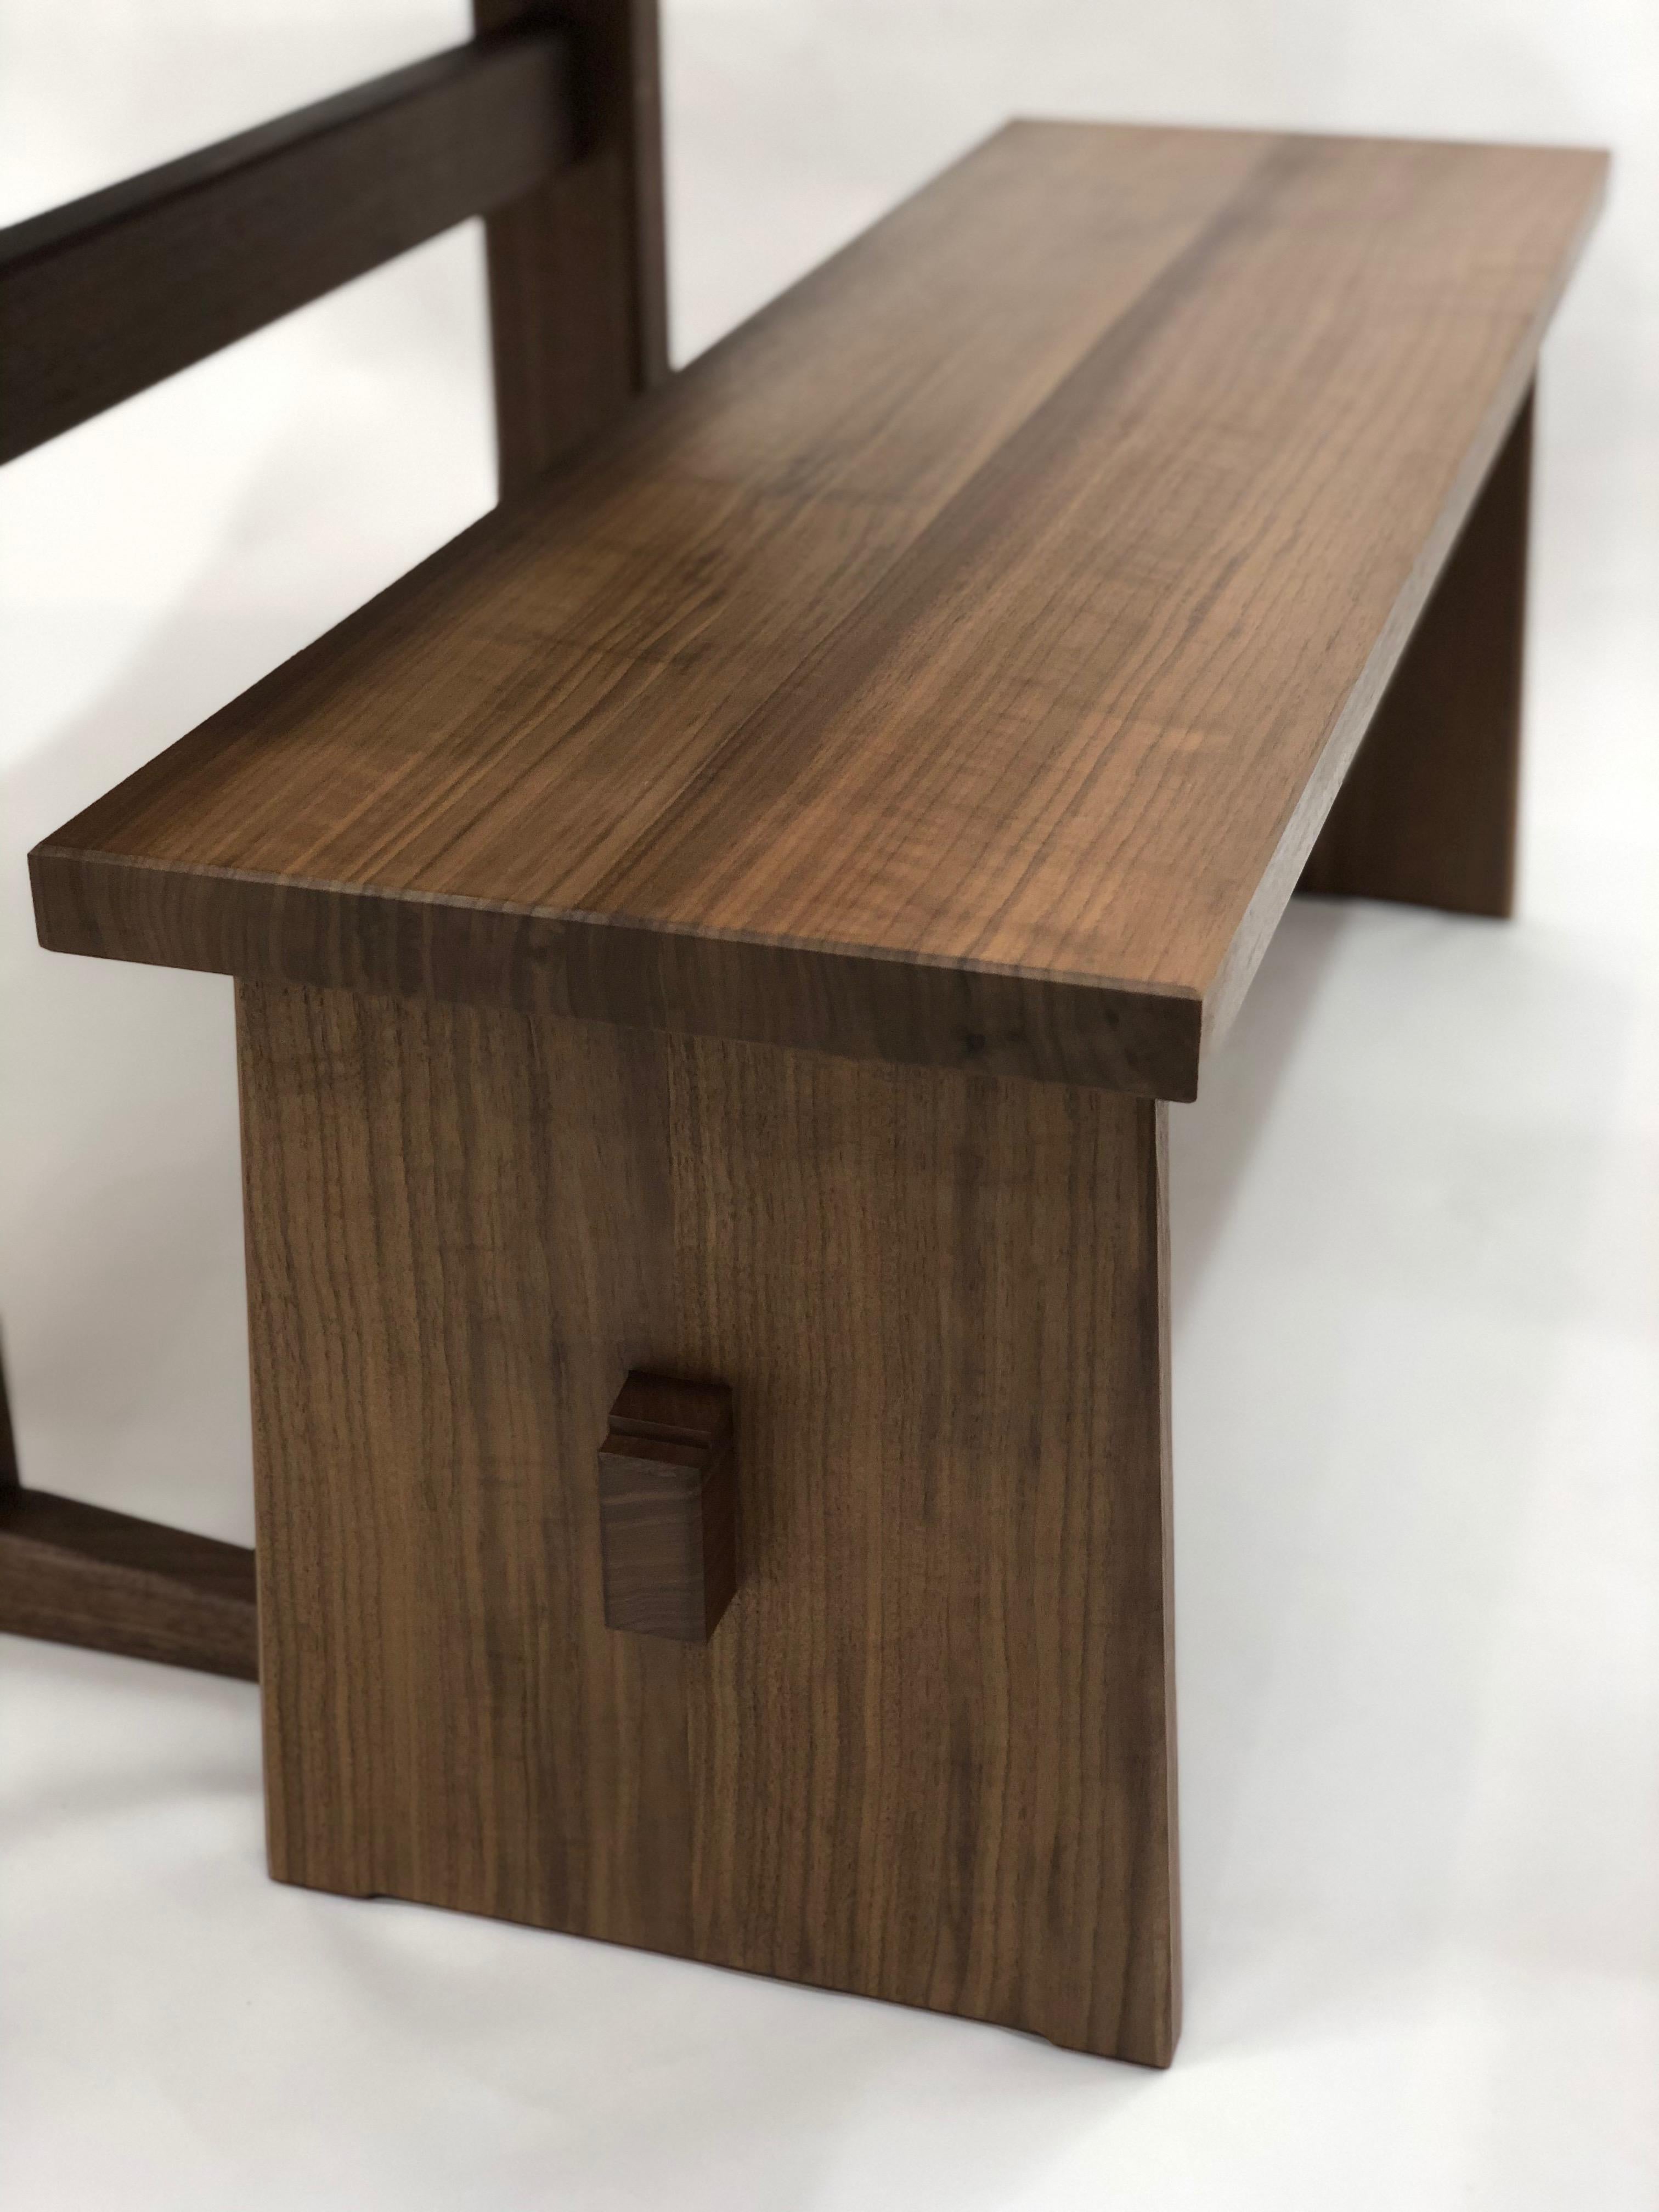 Trestle Base Bench Seat in Quarter Sawn Walnut by Brian Holcombe For Sale 1